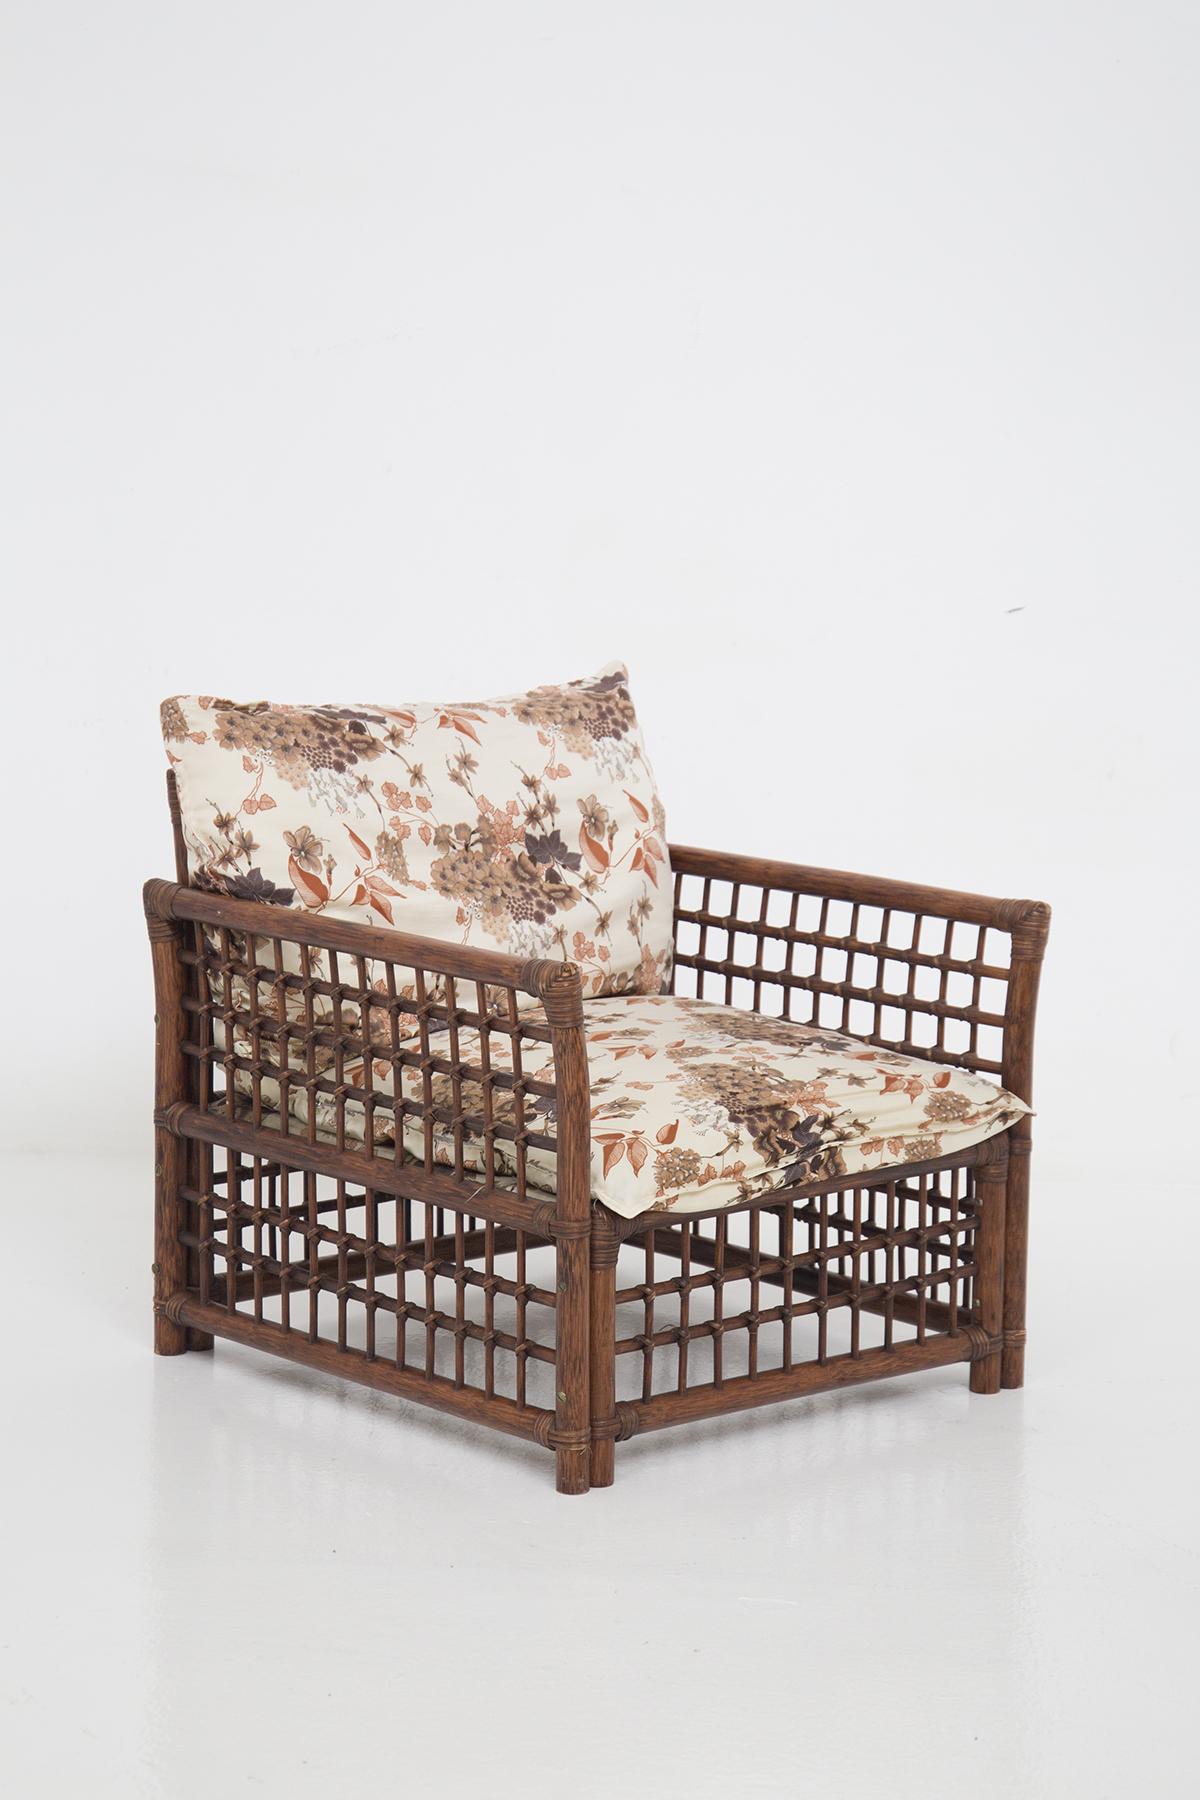 Beautiful rattan and wood armchairs designed in the 1960s by fine Italian manufacturer Vivai Del Sud.
The armchairs are wonderful, have a square shape with geometric and very hard lines.
The supporting structure is made of wood and rattan, making